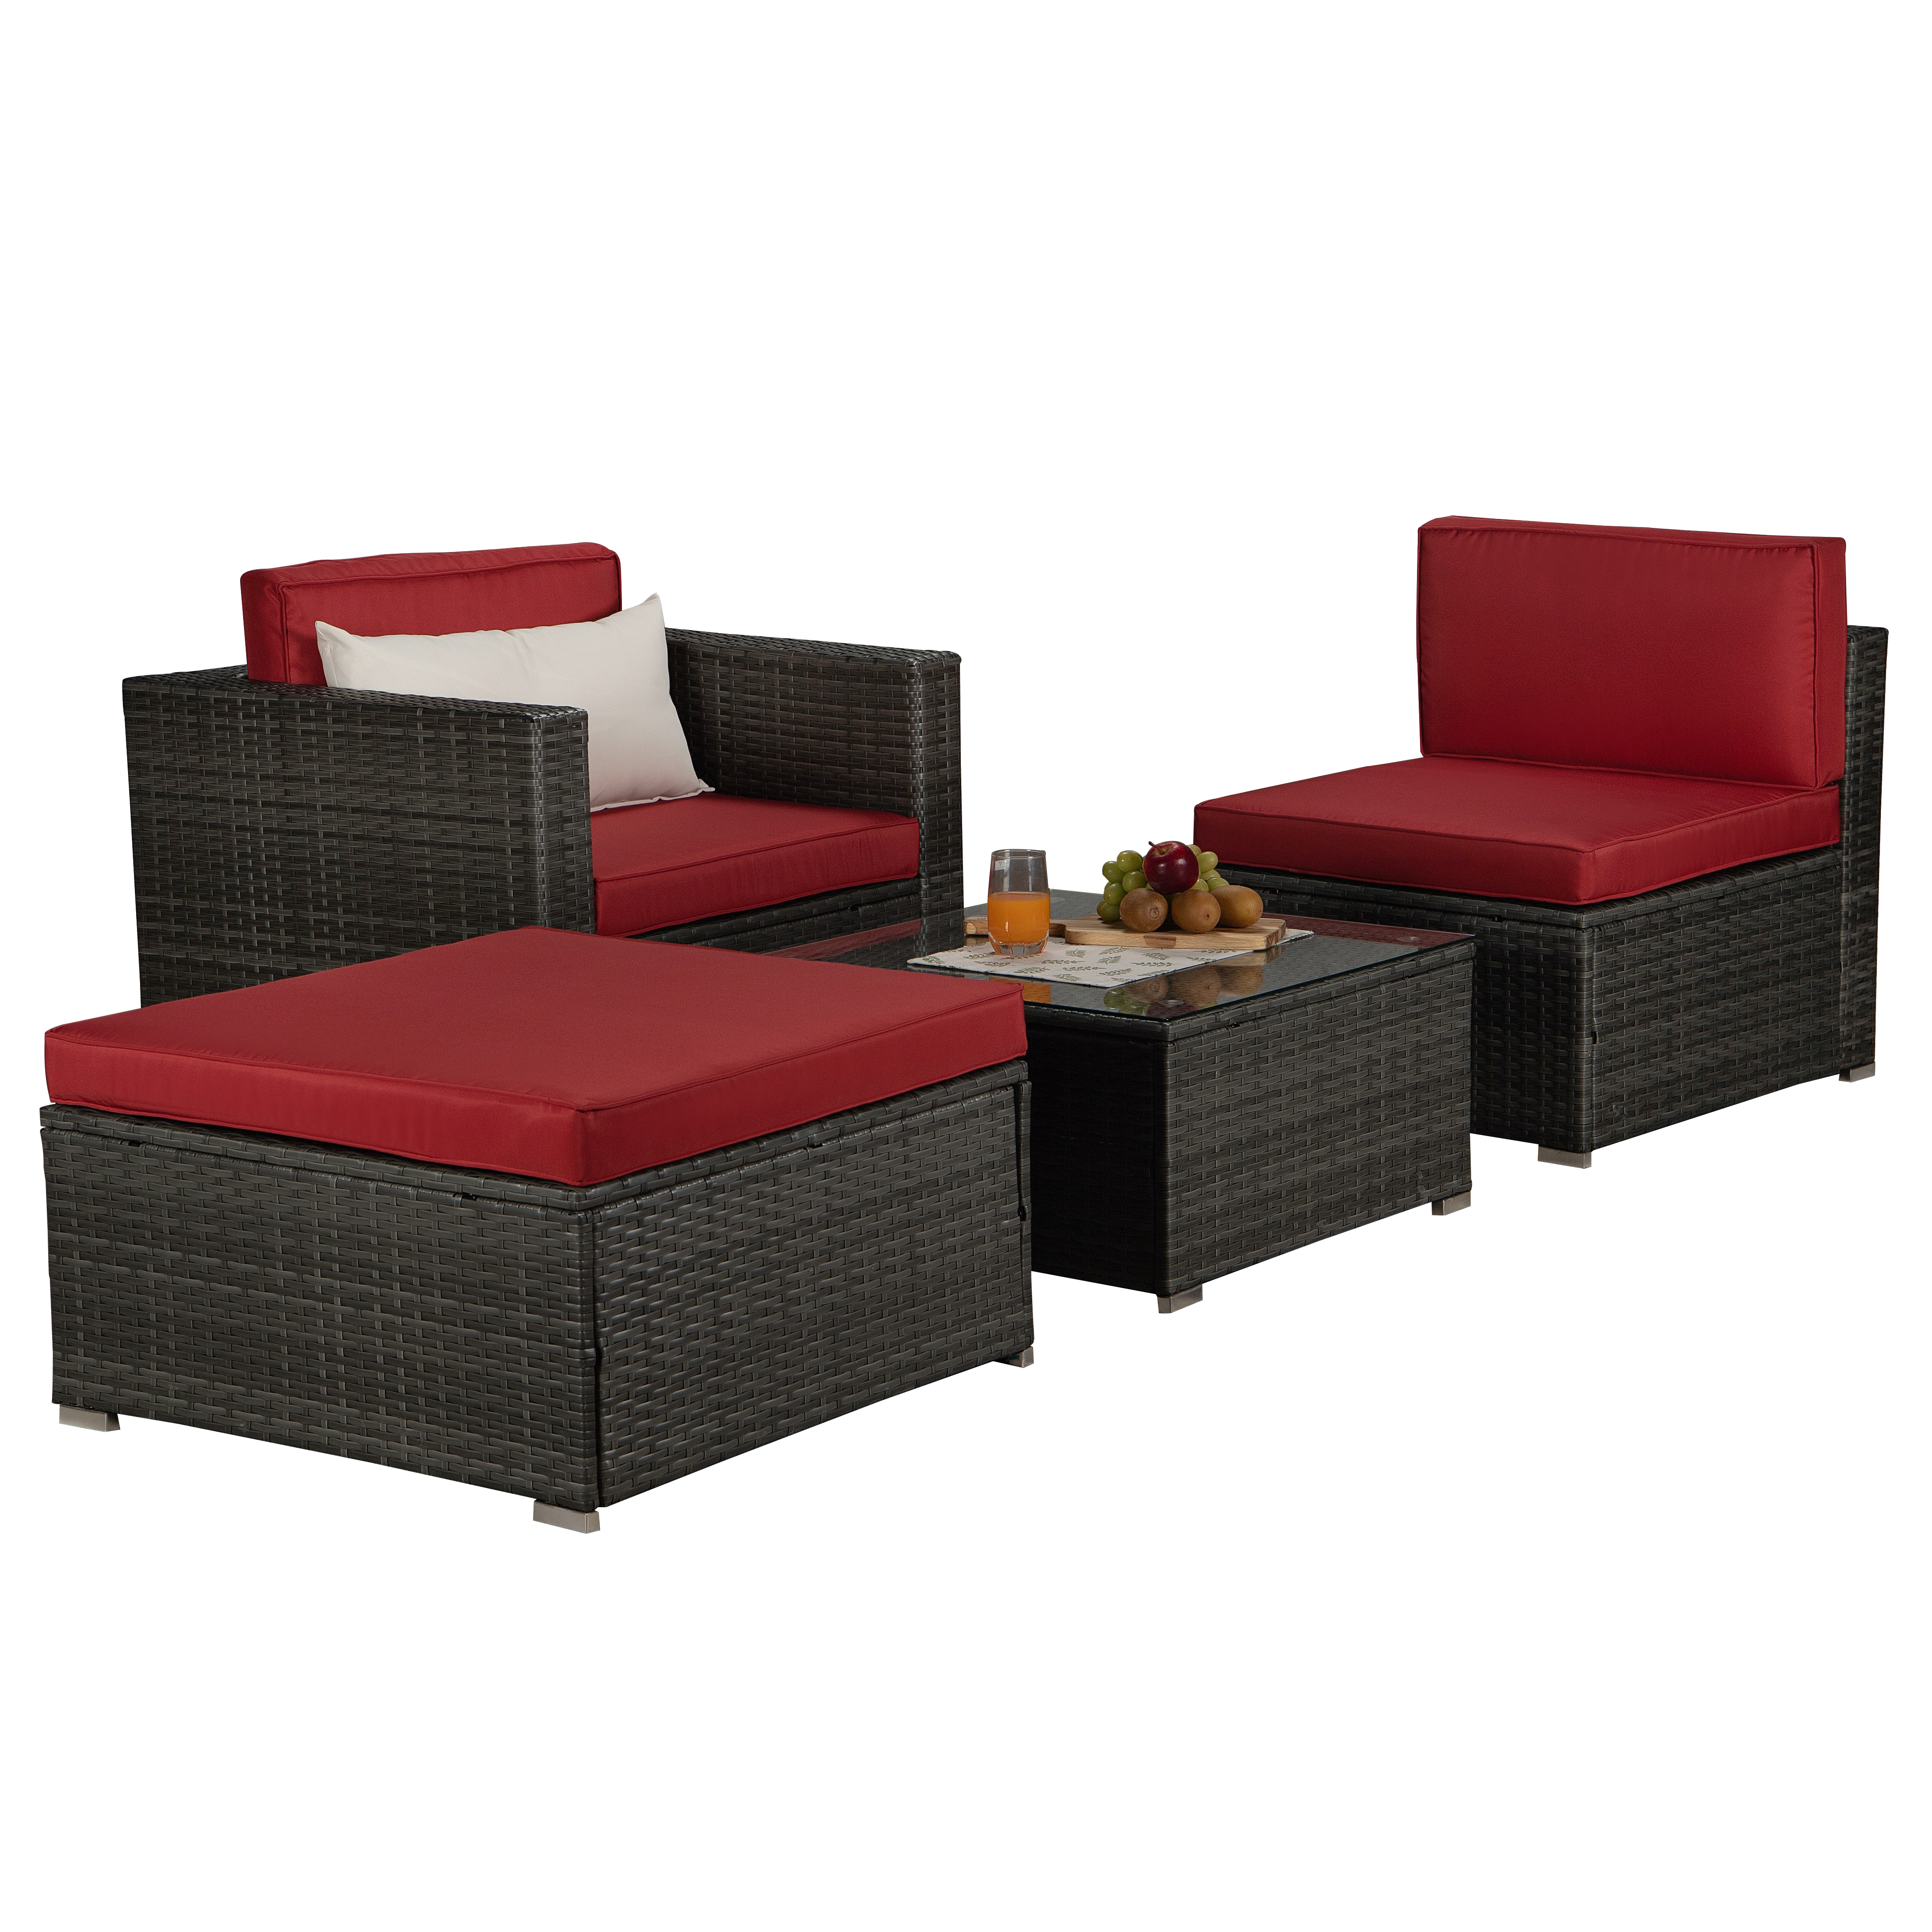 Beefurni Outdoor Garden Patio Furniture 4-Piece Gray PE Rattan Wicker Sectional Red Cushioned Sofa Sets with 1 Beige Pillow-Boyel Living